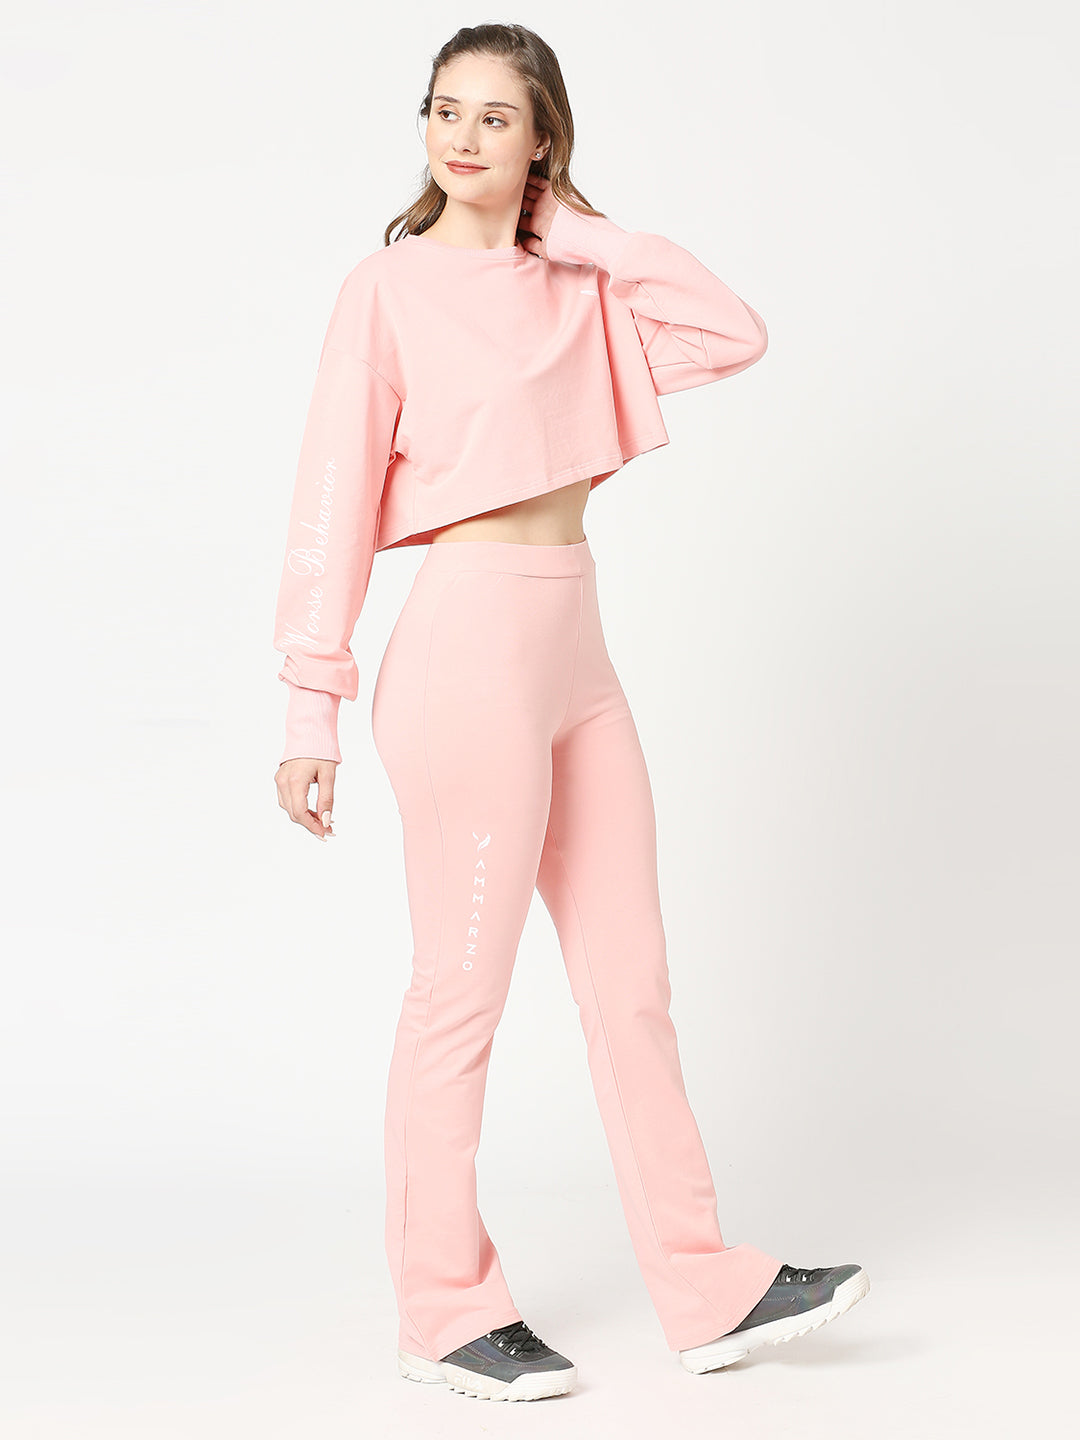 Pink cropped top and full pants set Co-Ords Set.